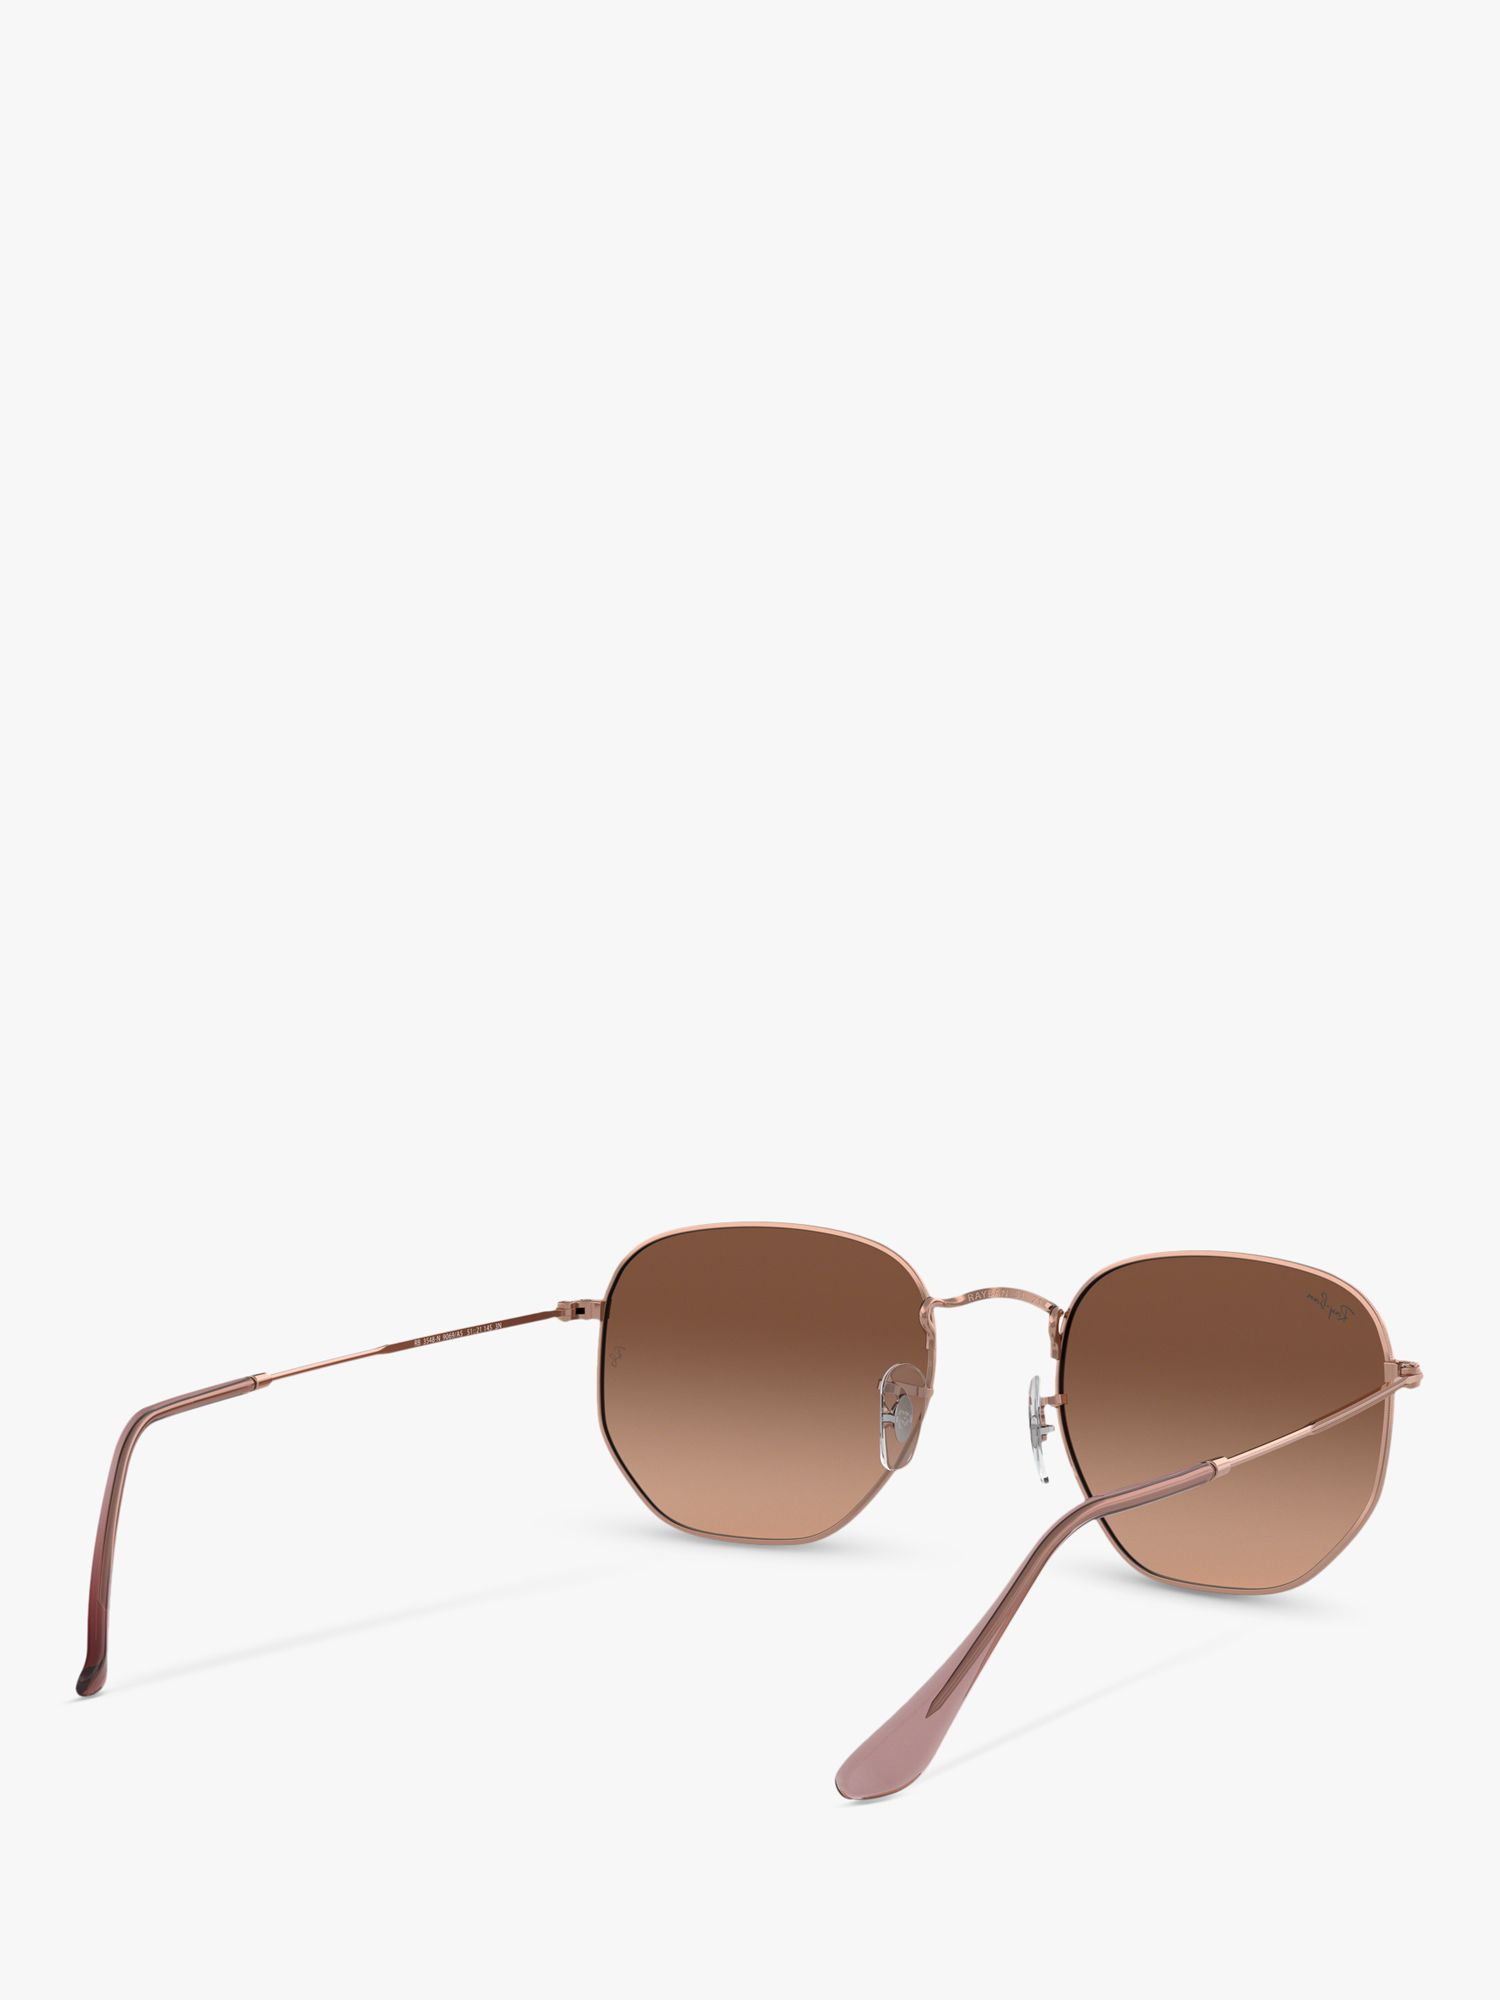 Ray Ban Rb3548n Unisex Hexagonal Sunglasses Copper Brown Gradient At John Lewis And Partners